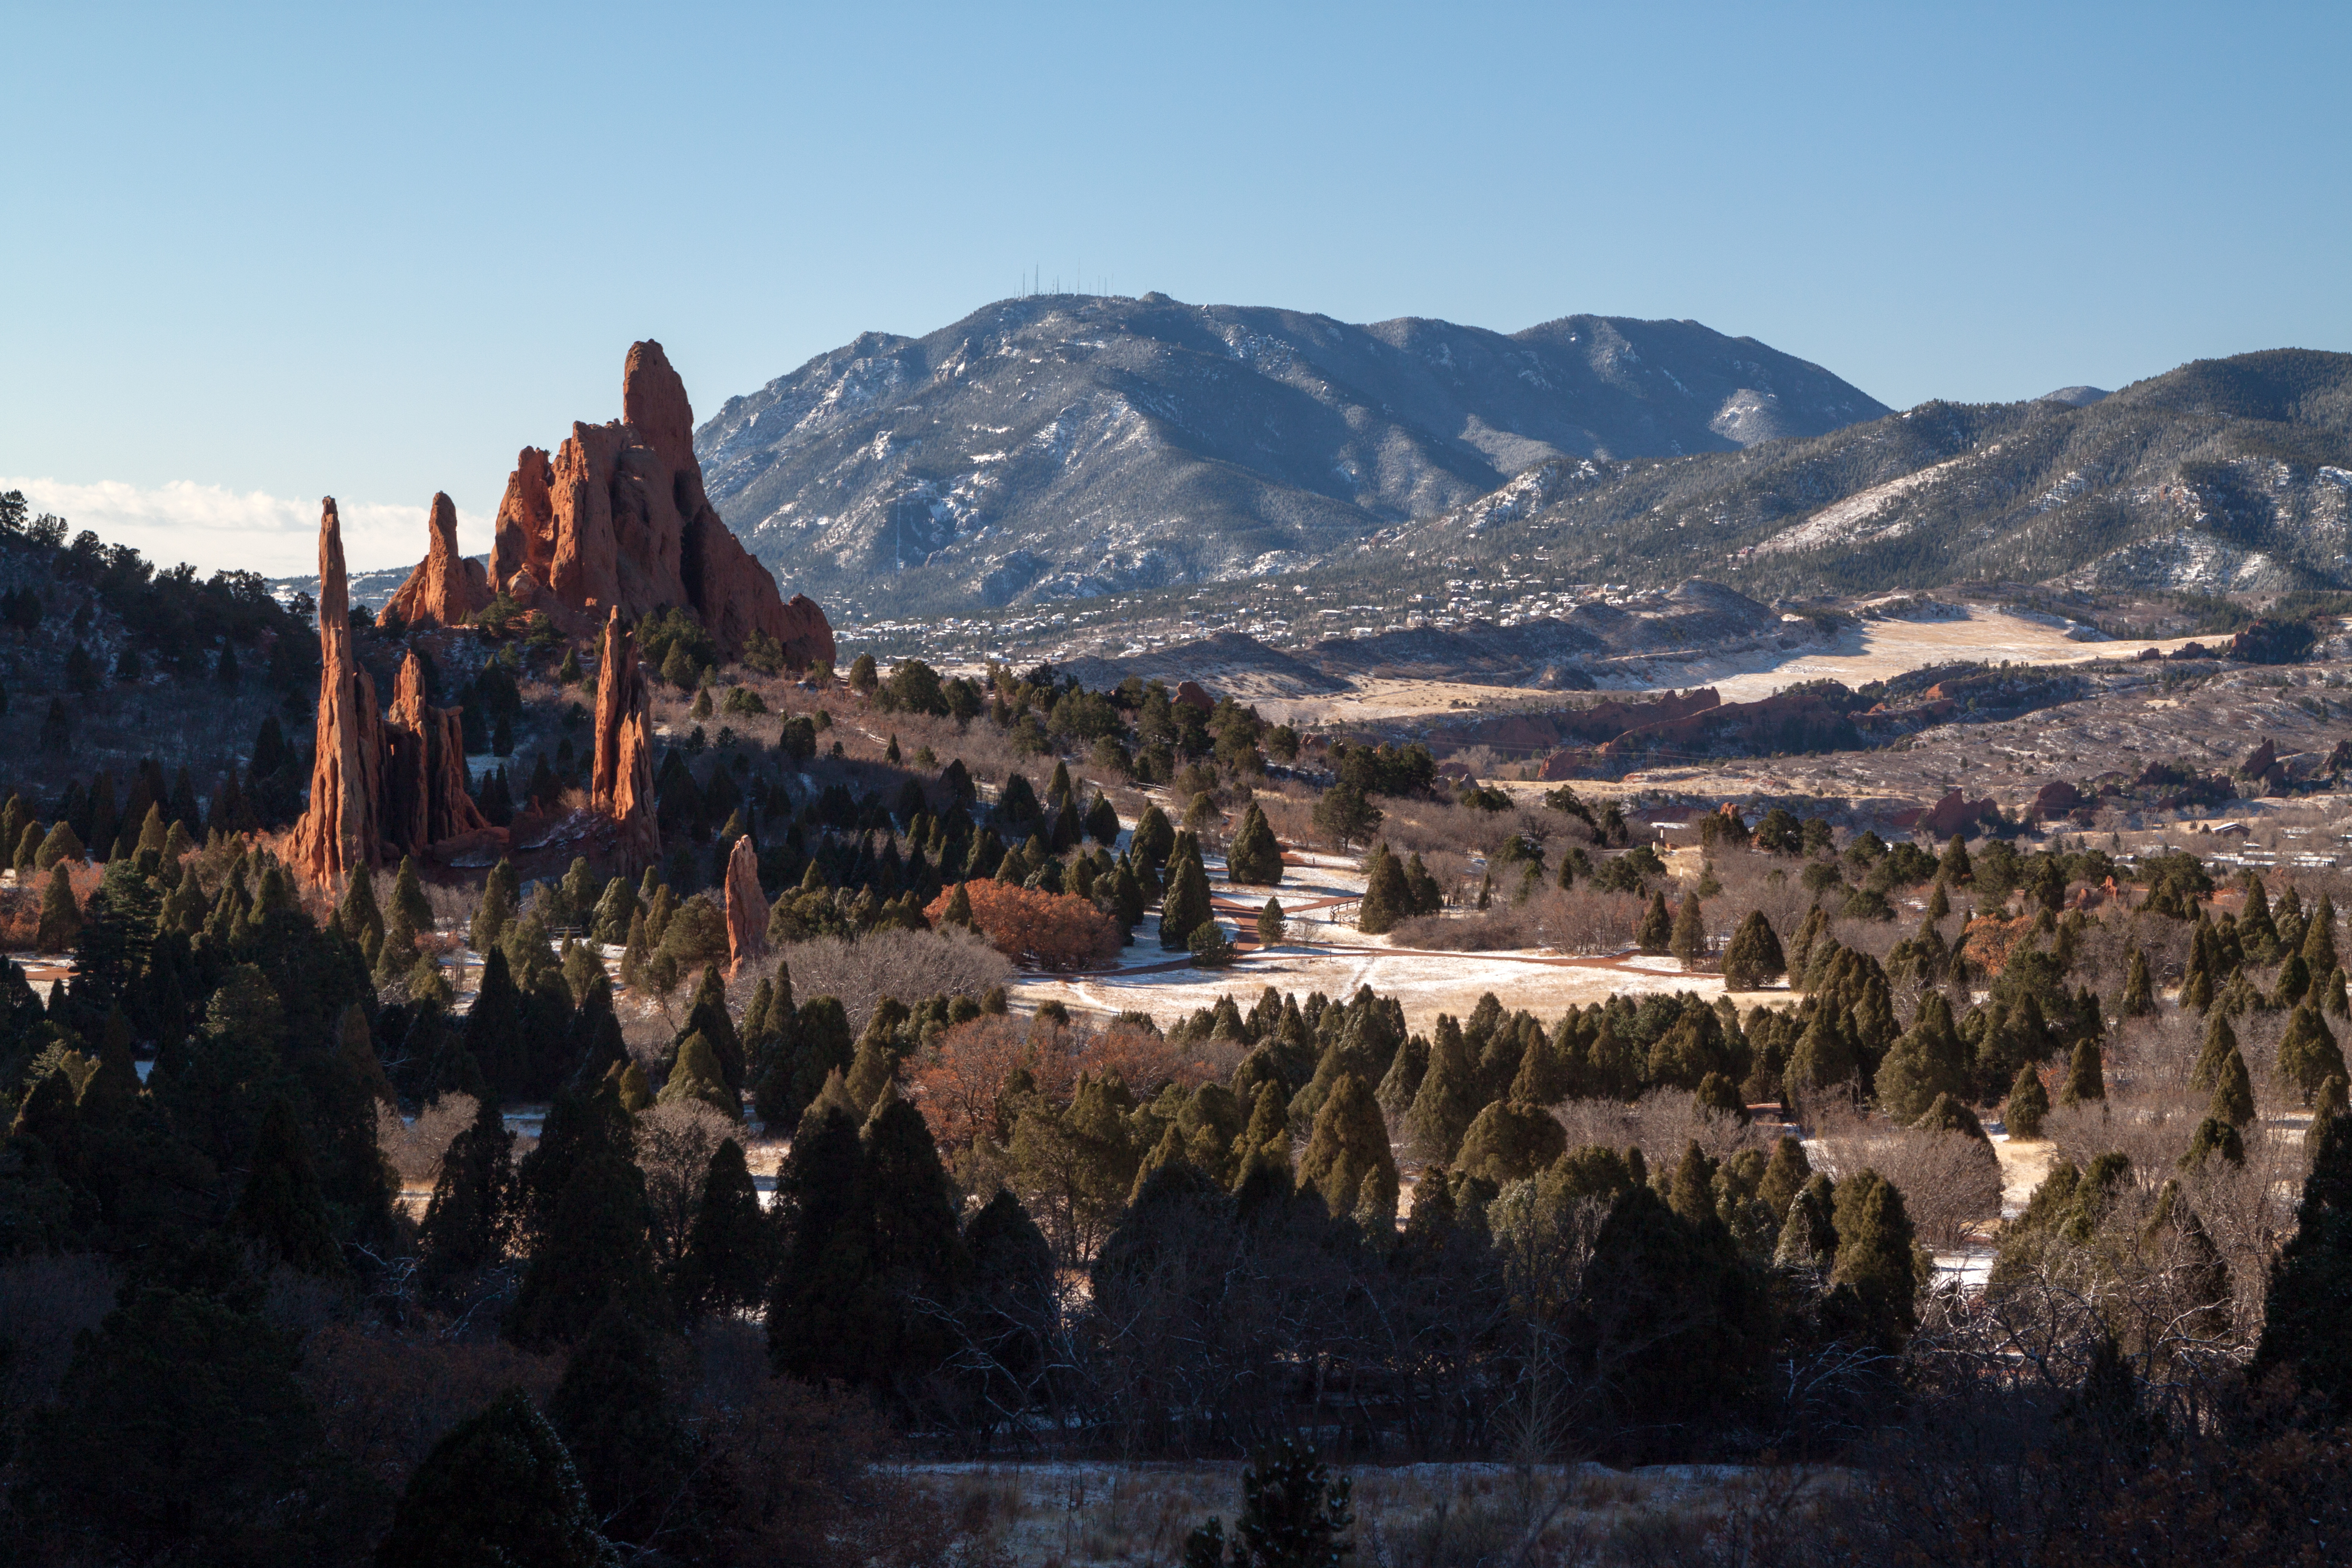 Cathedral Spires, Three Graces and Sleeping Giant rocks in Garden of the Gods, with Cheyenne Mountain in the background. Colorado Springs, Colorado